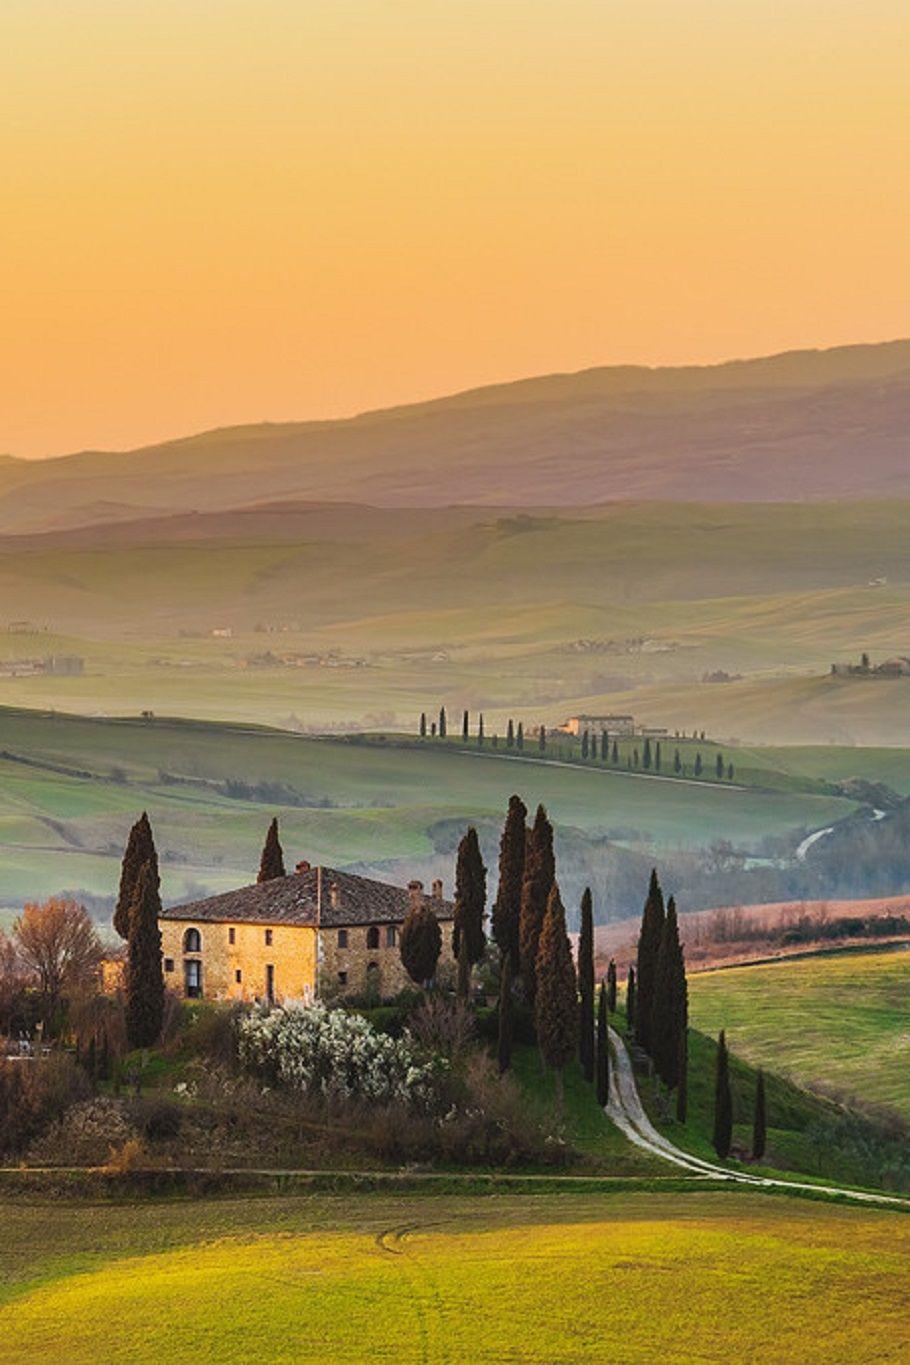 Another amazing picture of the Tuscan Countryside #Tuscany #travel